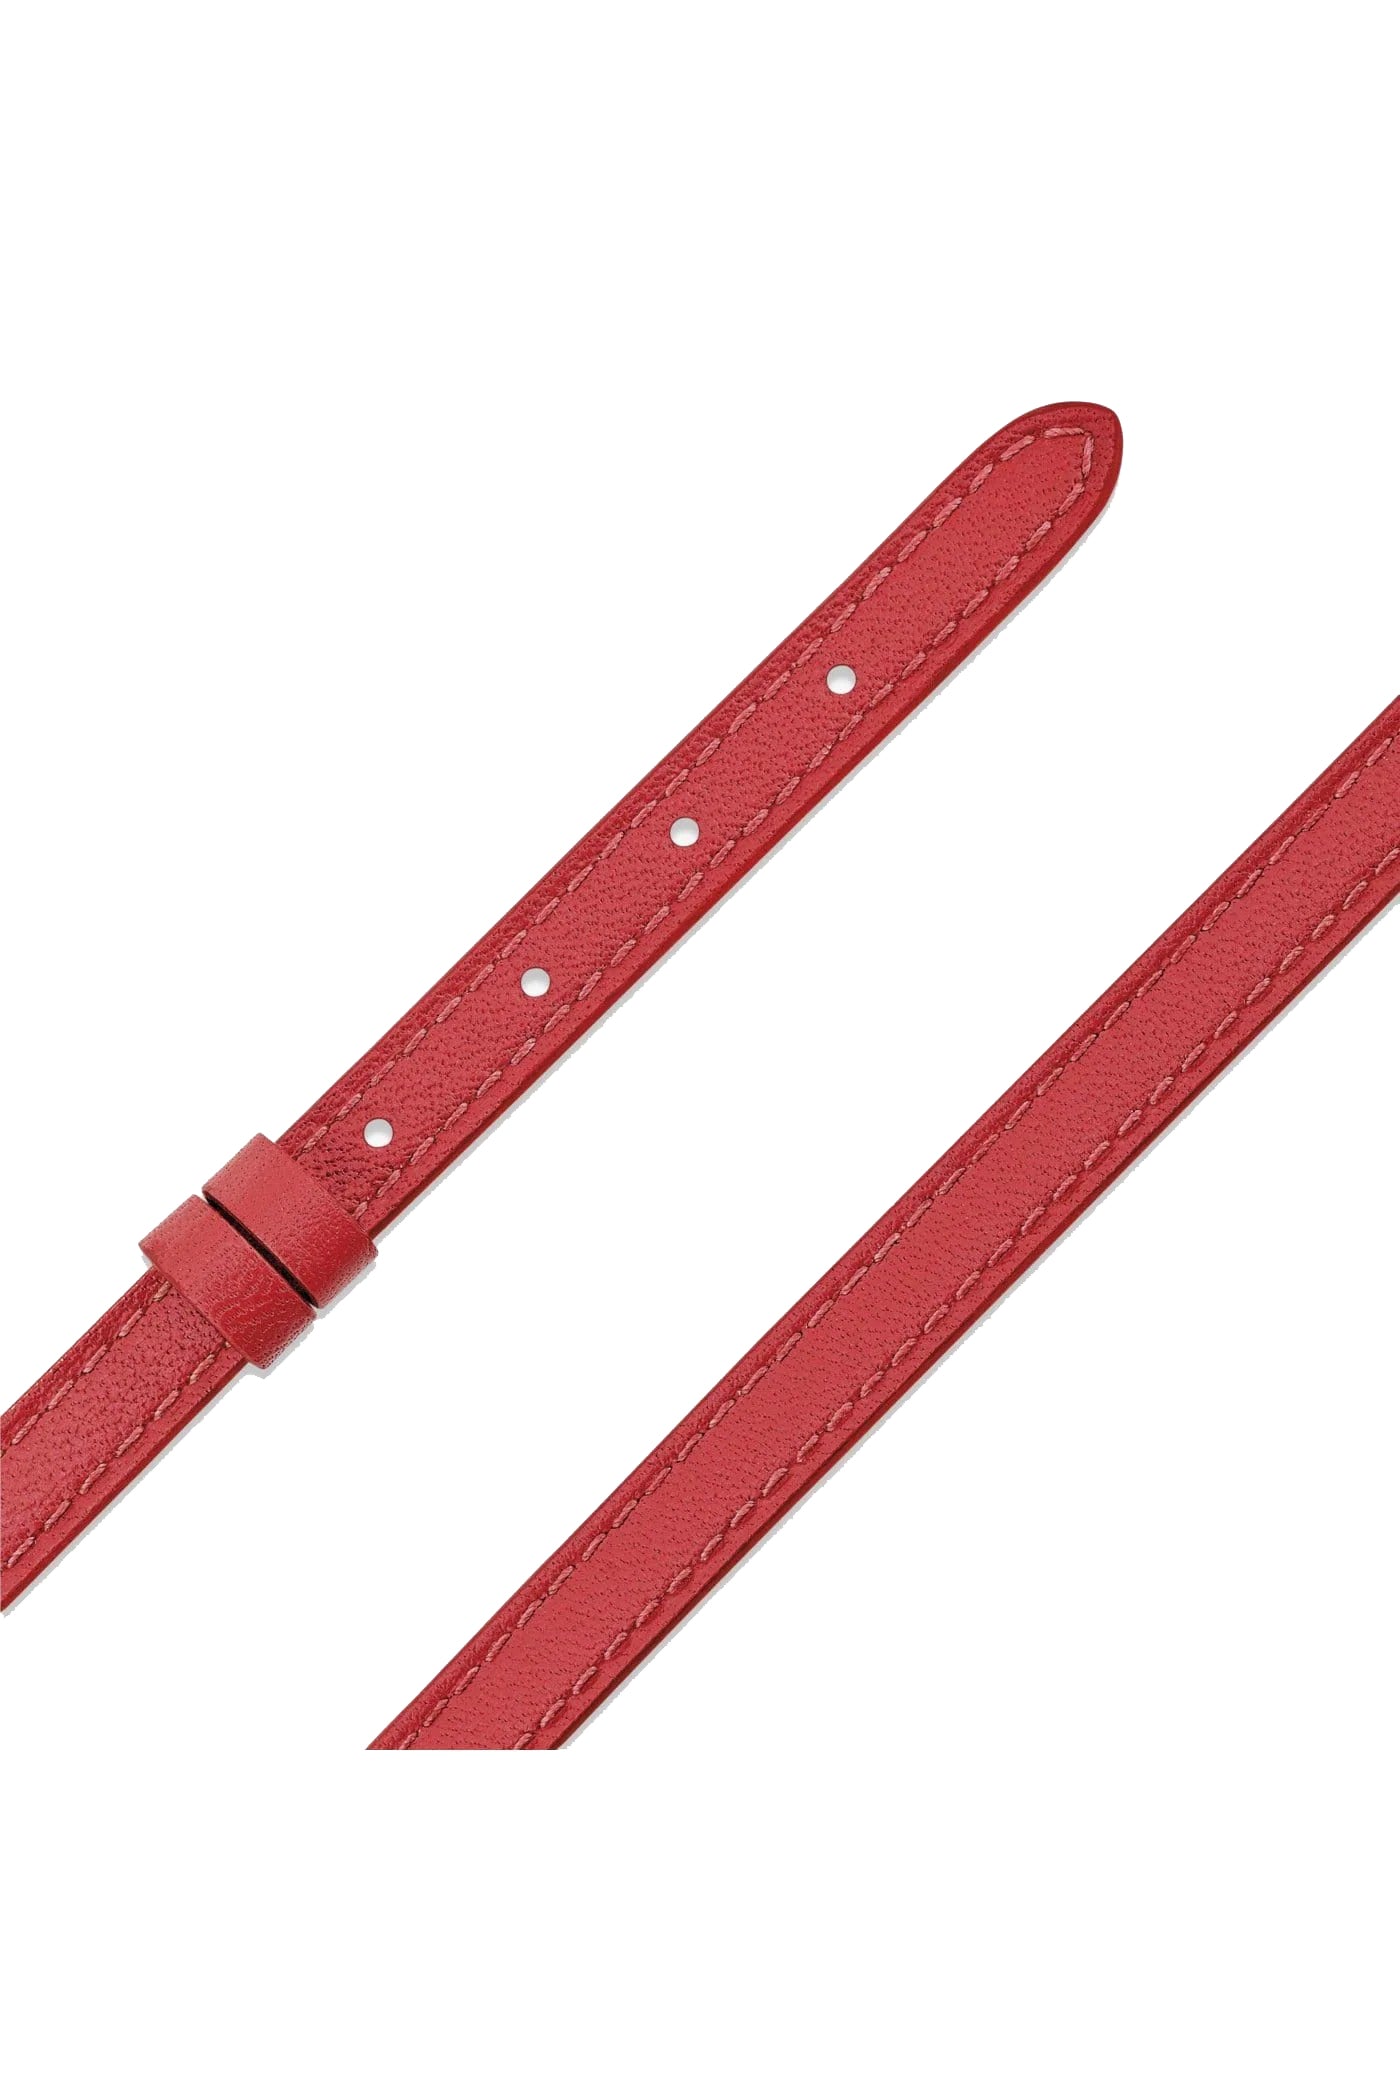 MESSIKA-My Move Leather Bracelet - Cherry Red-RED